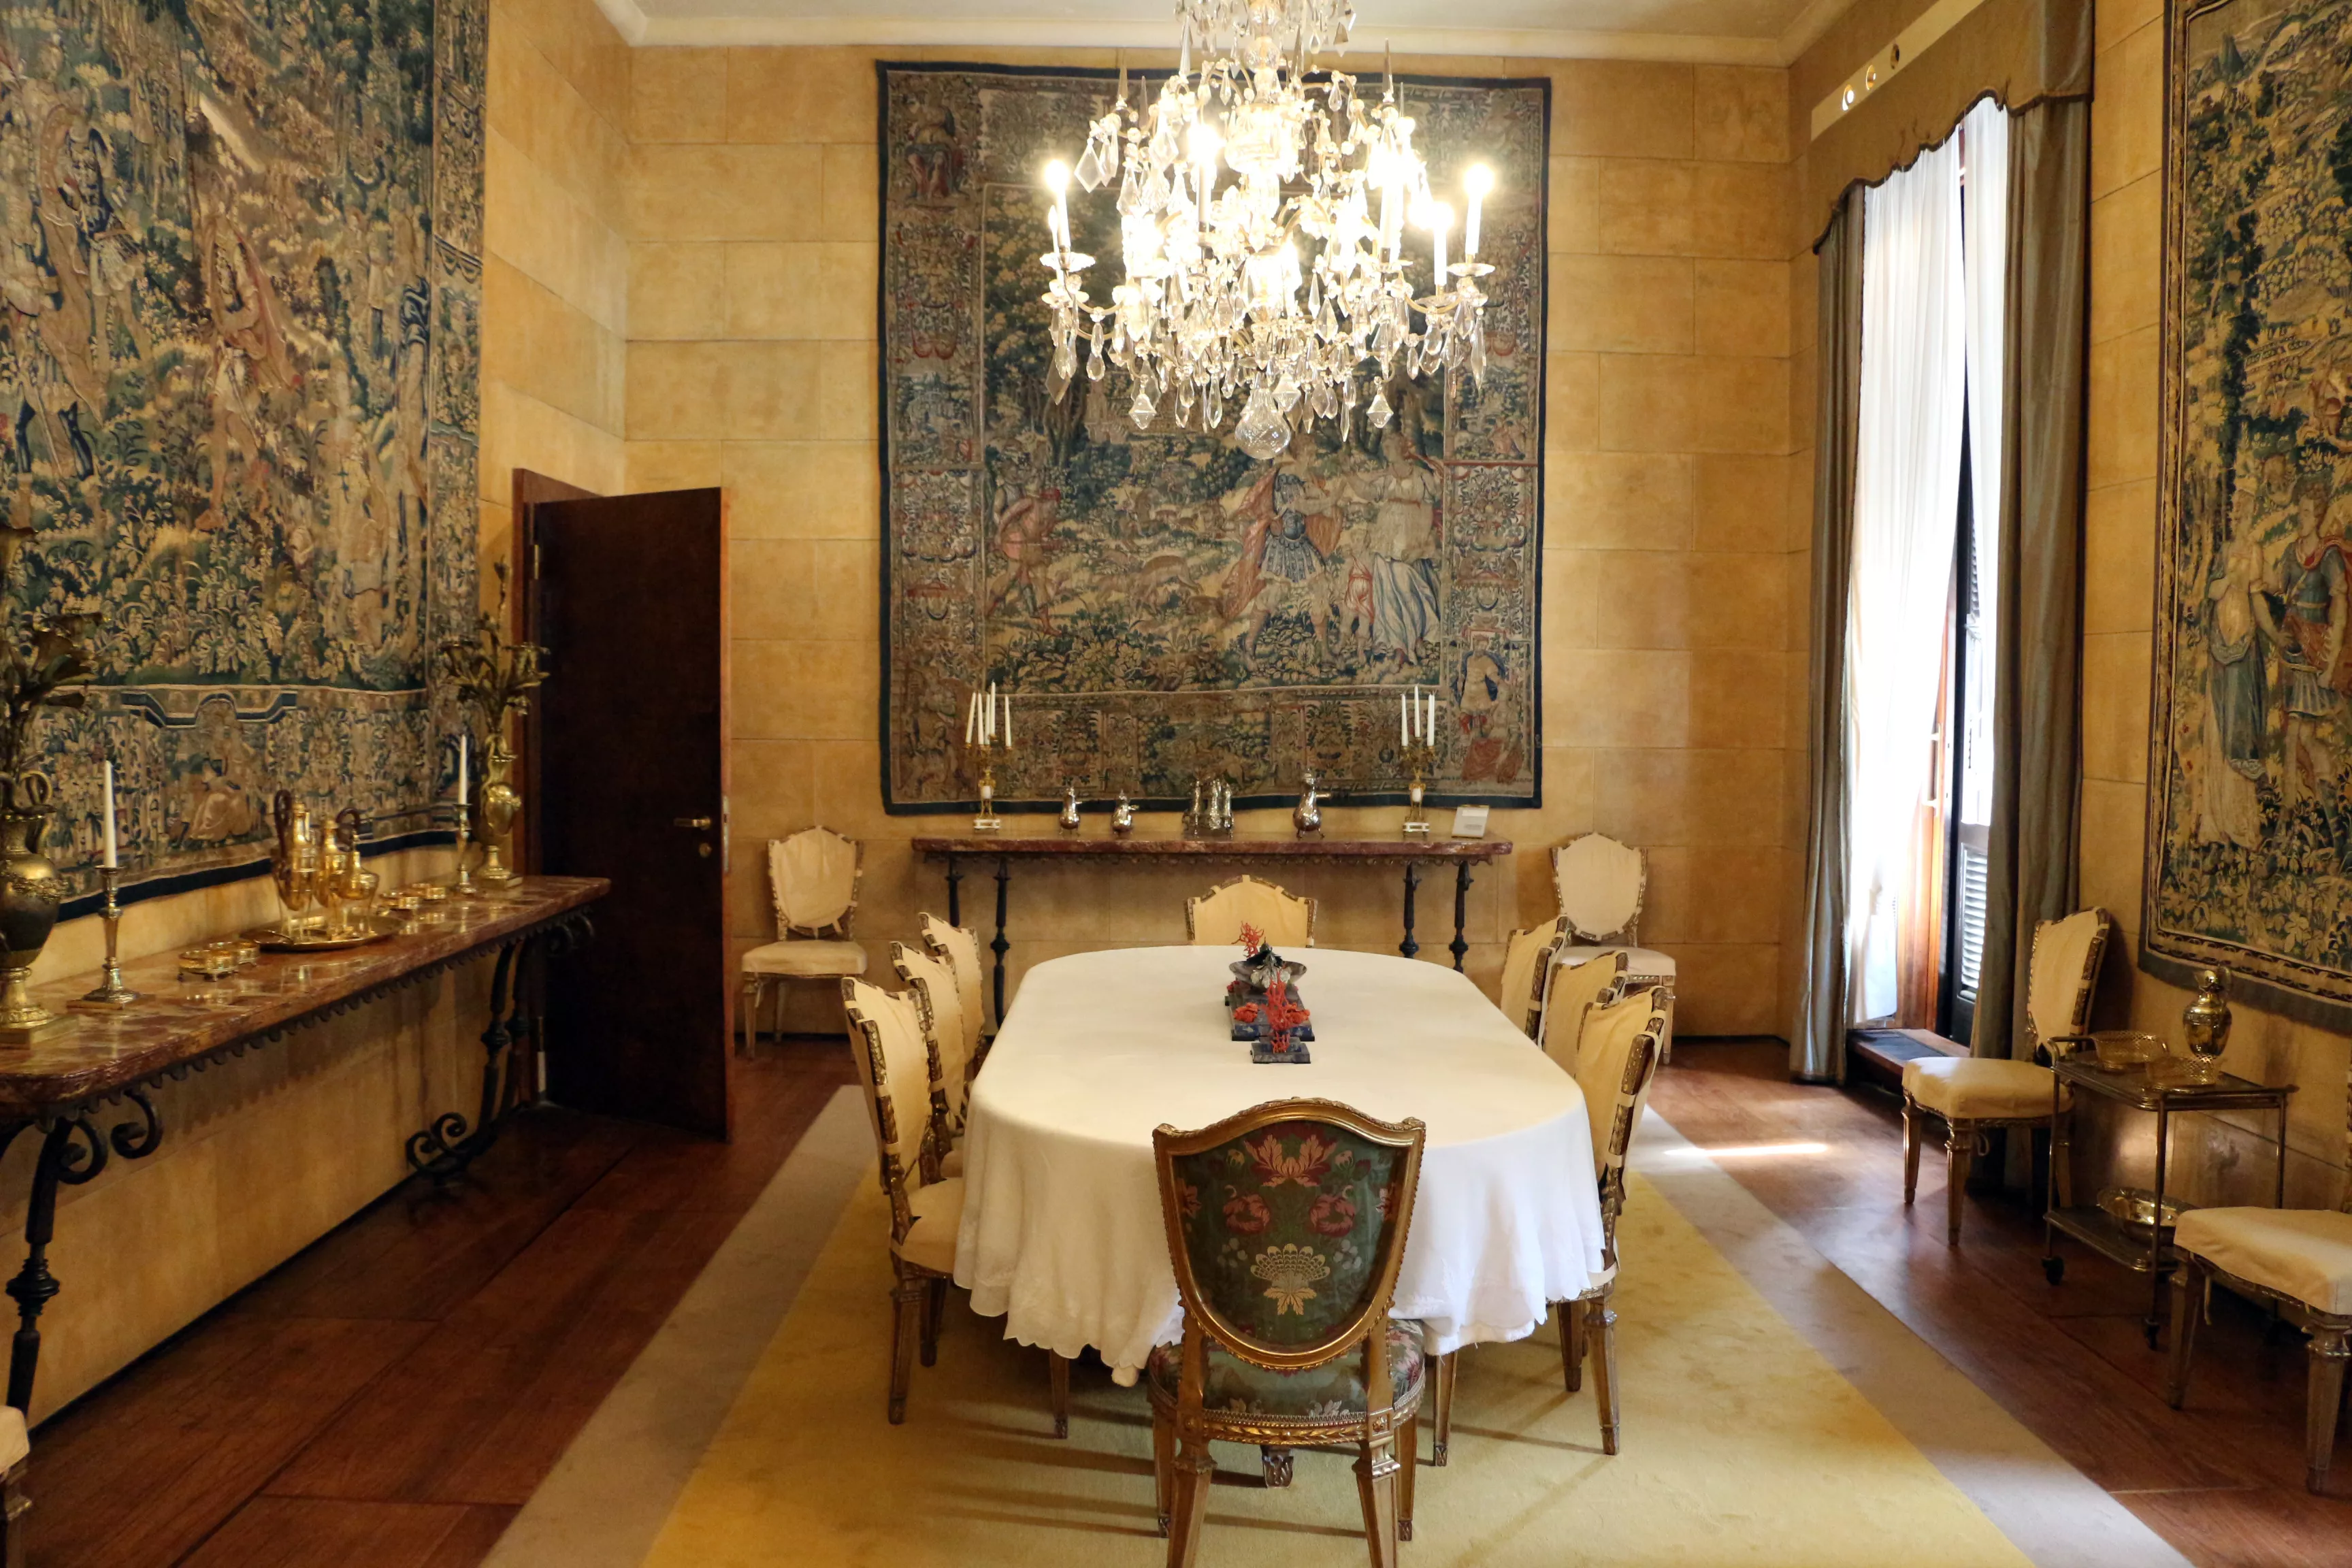 Villa Necchi Campiglio in Italy, Europe | Museums - Rated 3.8